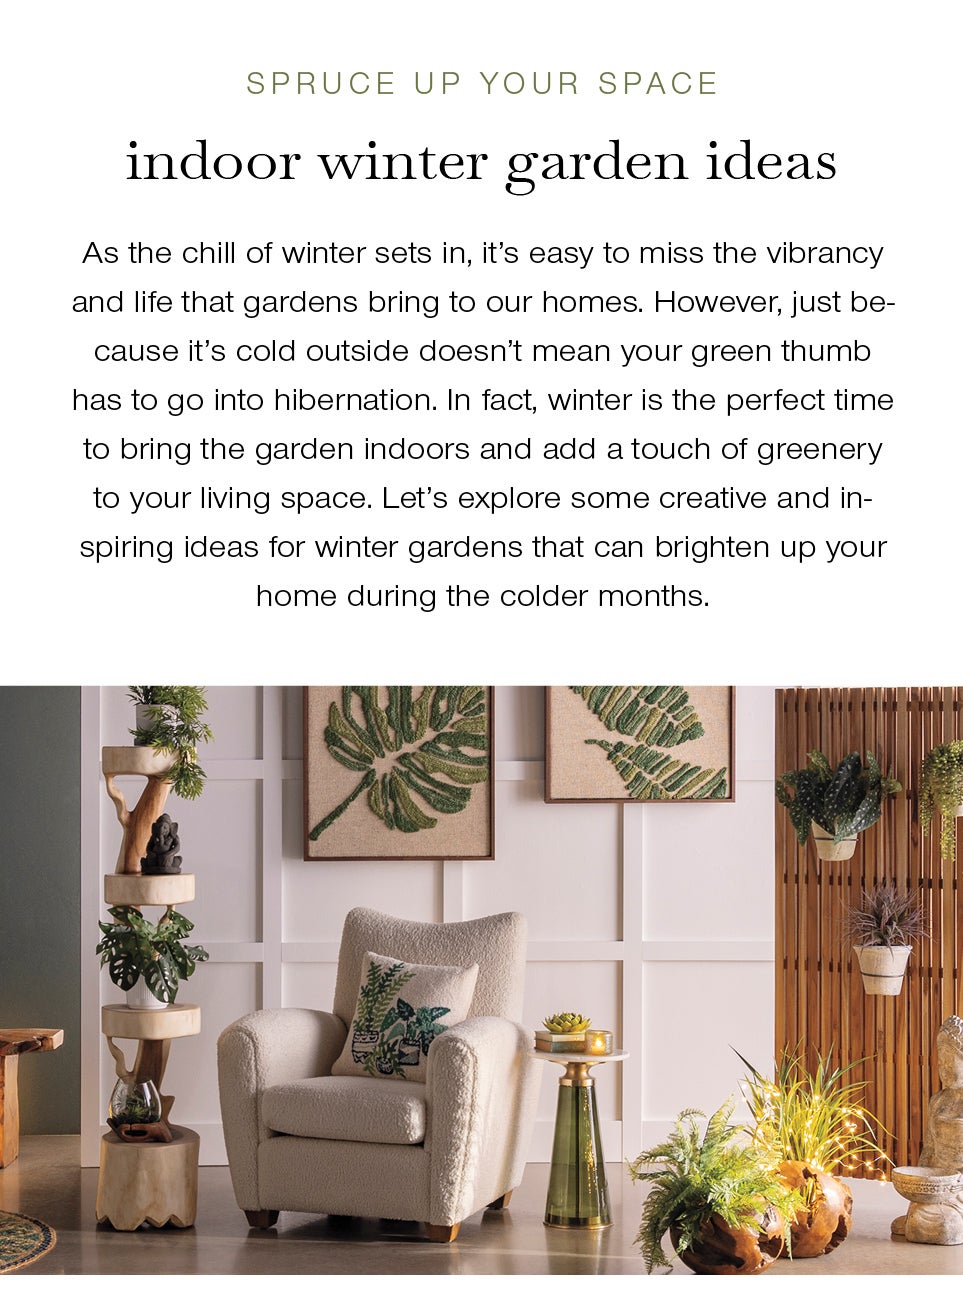 Spruce Up Your Space: Winter Garden Ideas<br /><br />As the chill of winter sets in, it's easy to miss the vibrancy and life that gardens bring to our homes. However, just because it's cold outside doesn't mean your green thumb has to go into hibernation. In fact, winter is the perfect time to bring the garden indoors and add a touch of greenery to your living space. Let’s explore some creative and inspiring ideas for winter gardens that can brighten up your home during the colder months.